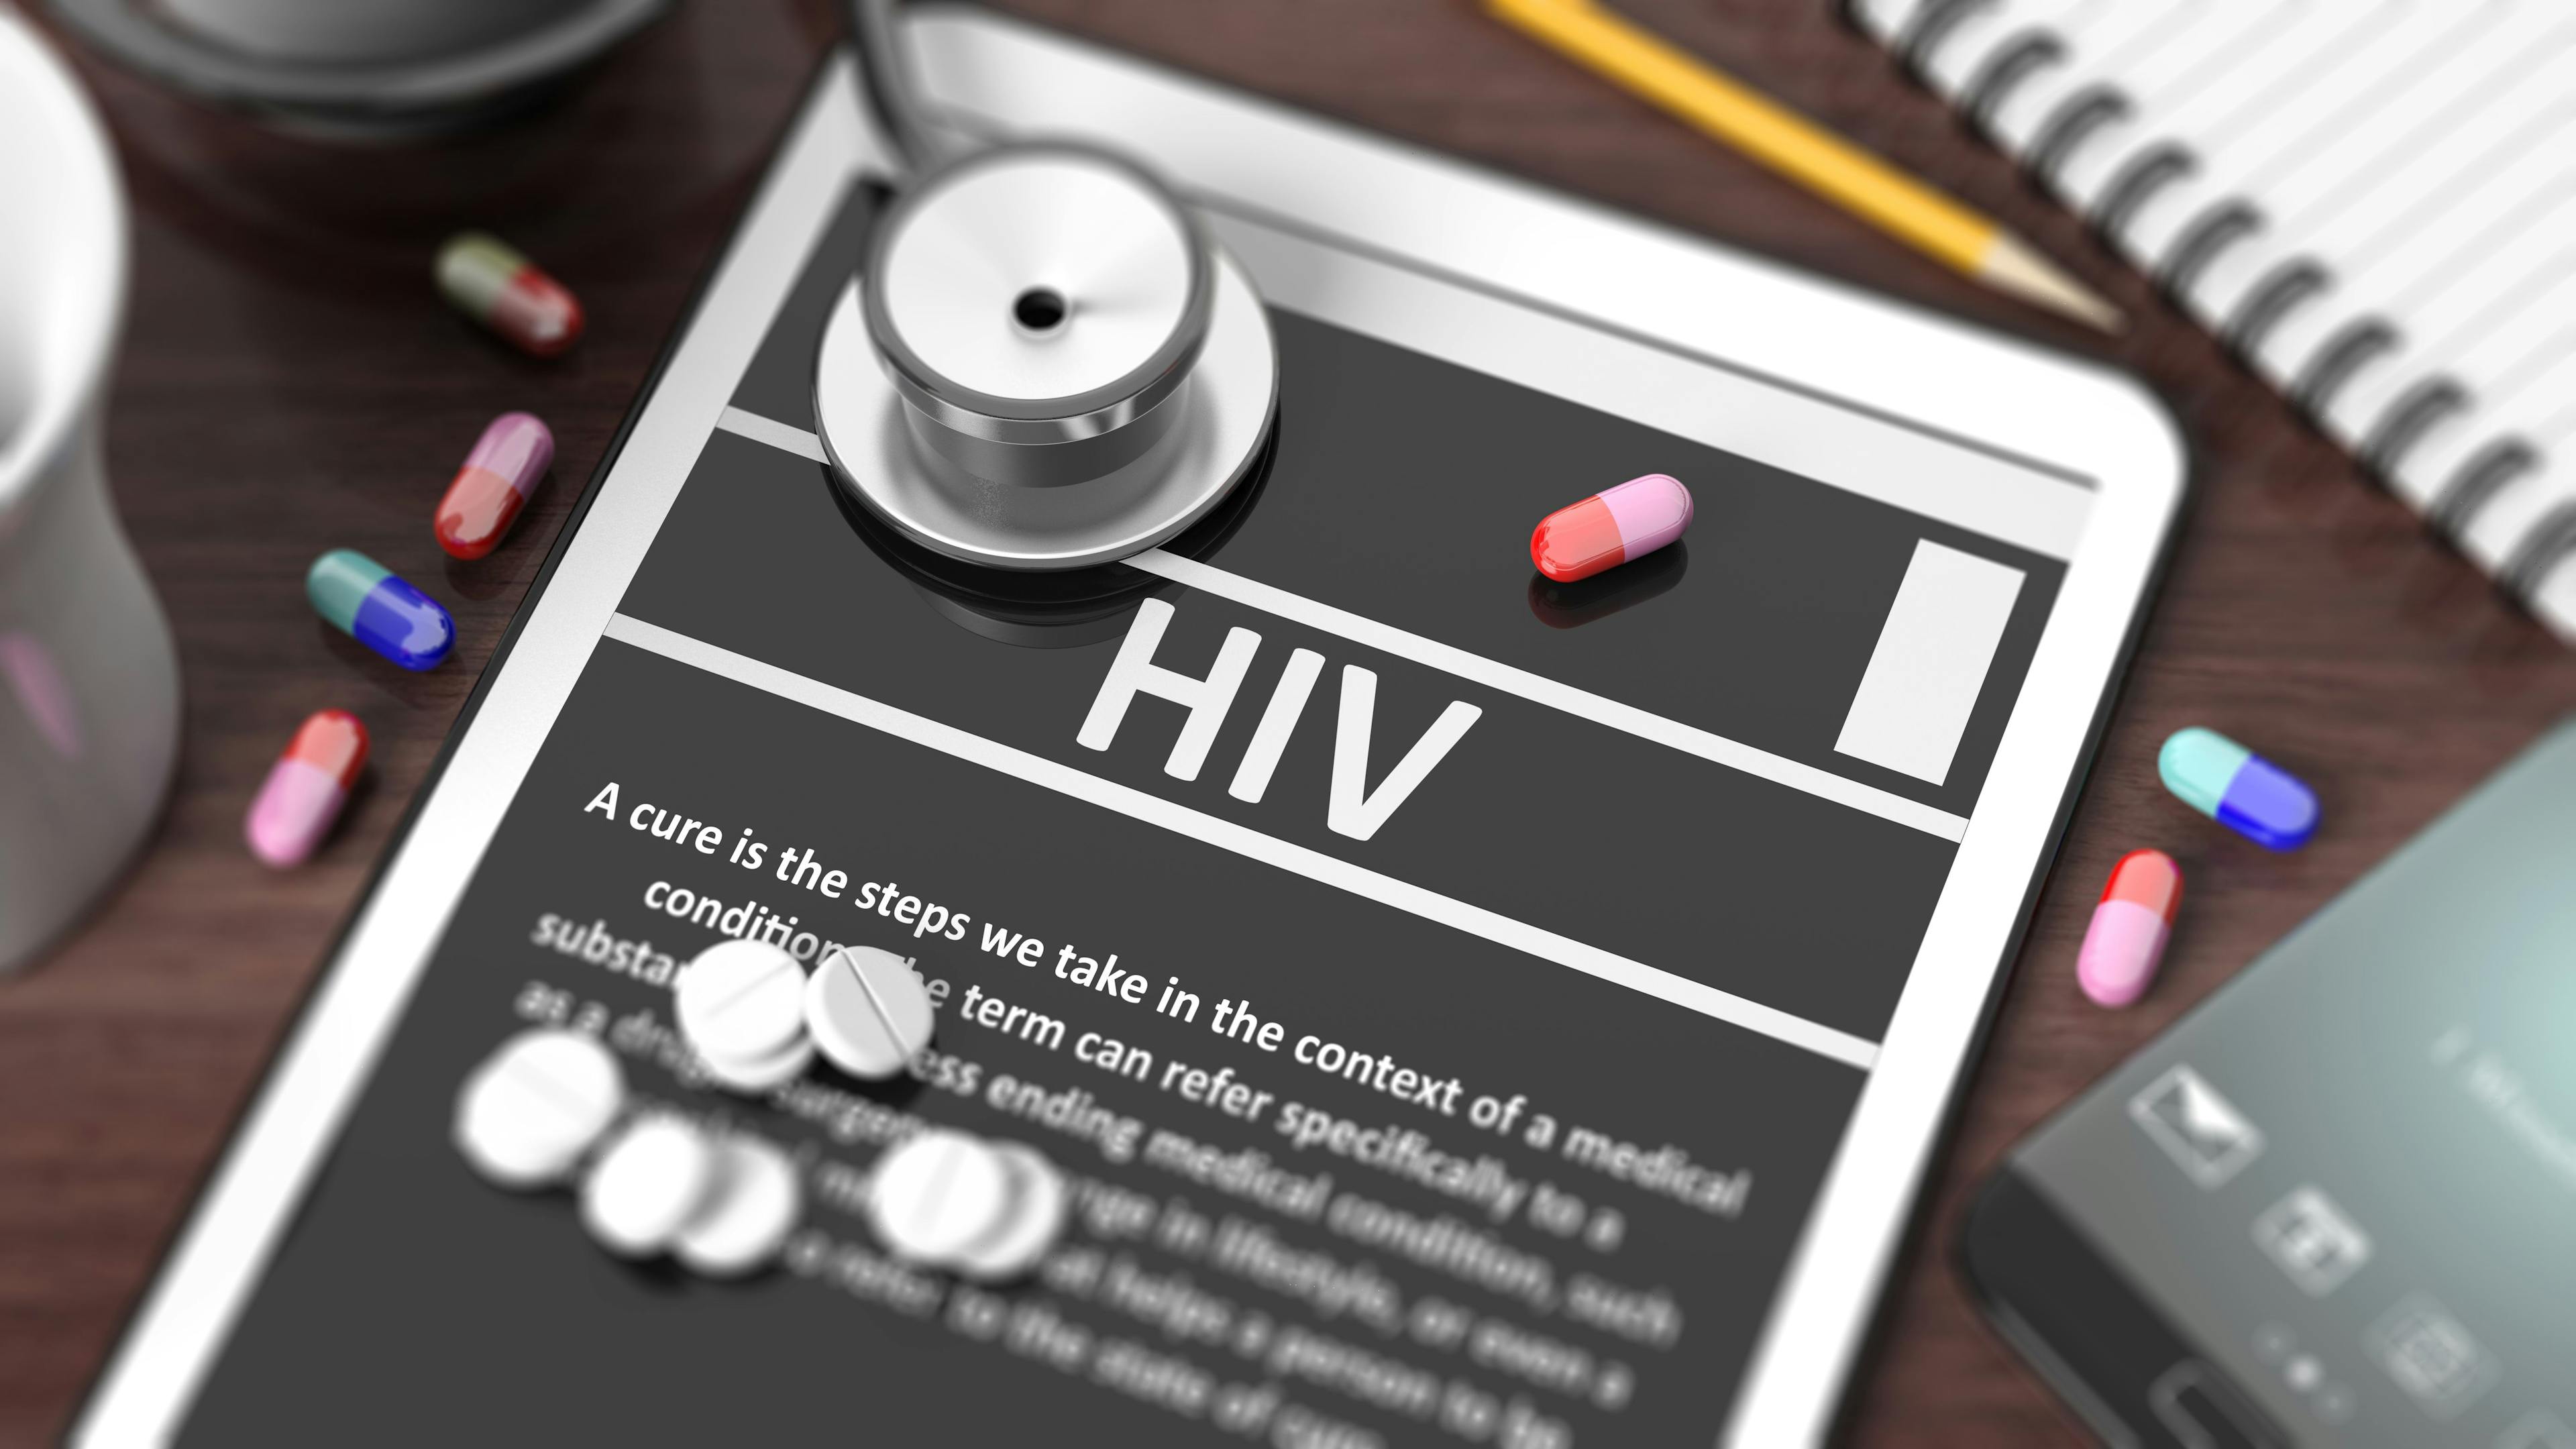 Australian Study Shows Benefits of HIV Treatment on Incidence